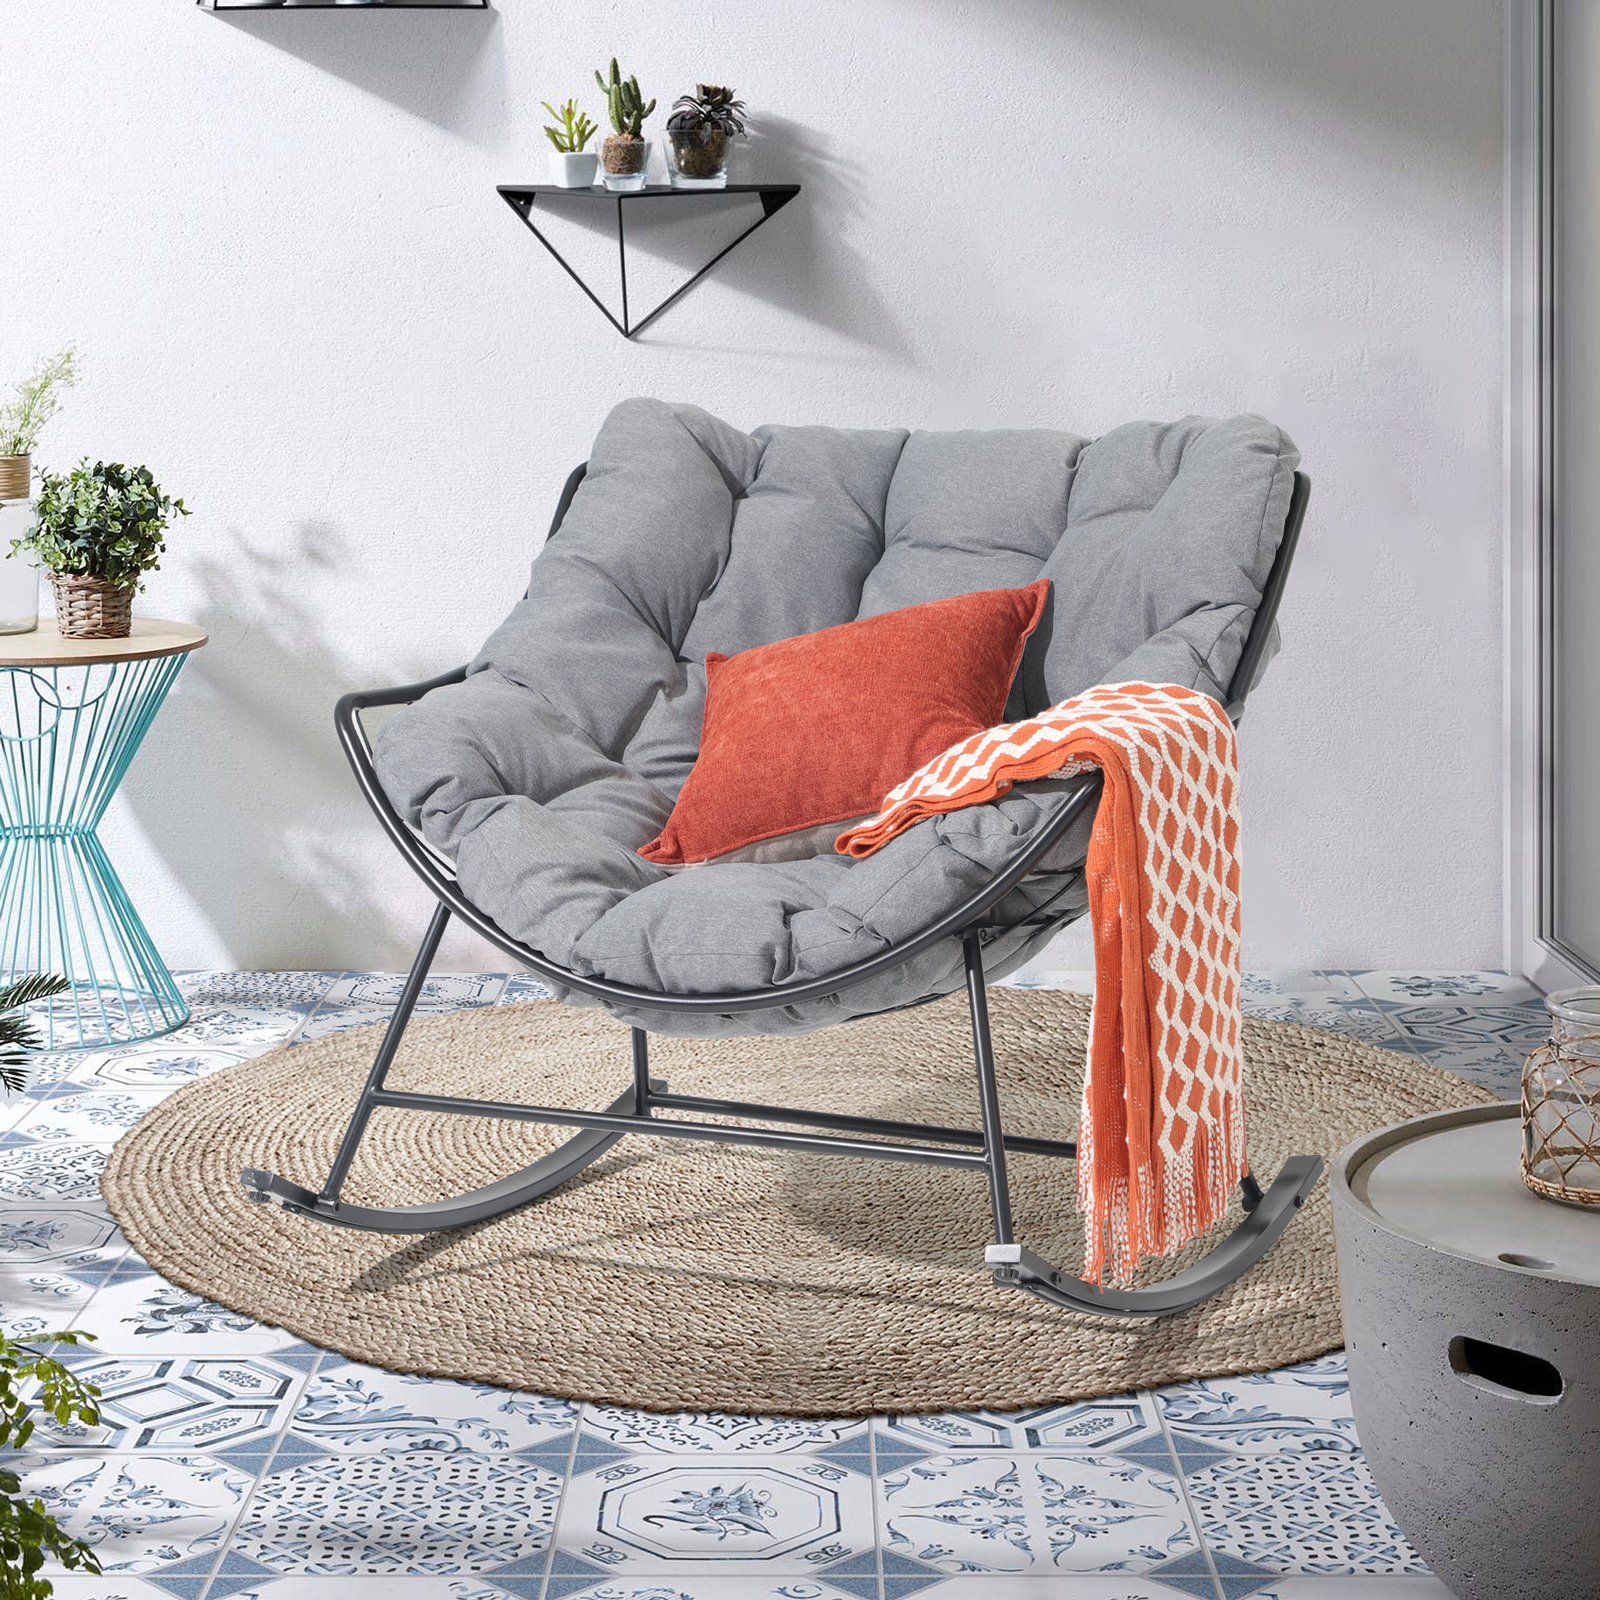 Outdoor Rocking Chair, Patio Comfy Reading Chairs with Oversized Cushion,2 Colors